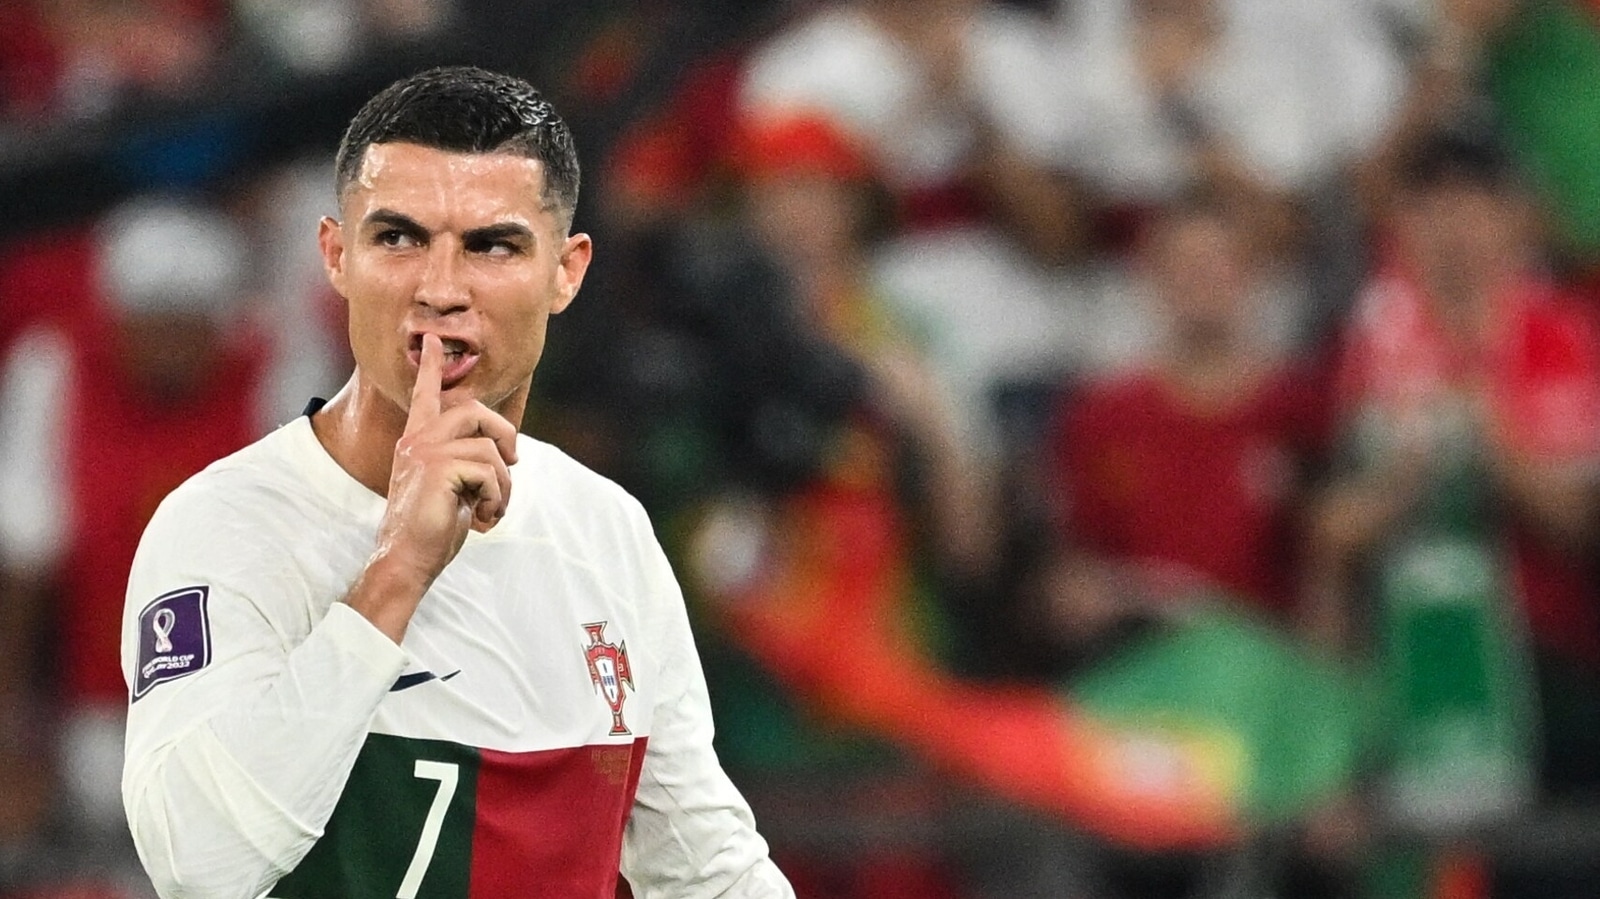 ‘Told him to shut up’: Ronaldo ‘insulted’ by South Korea player in verbal spat during Portgual’s World Cup loss